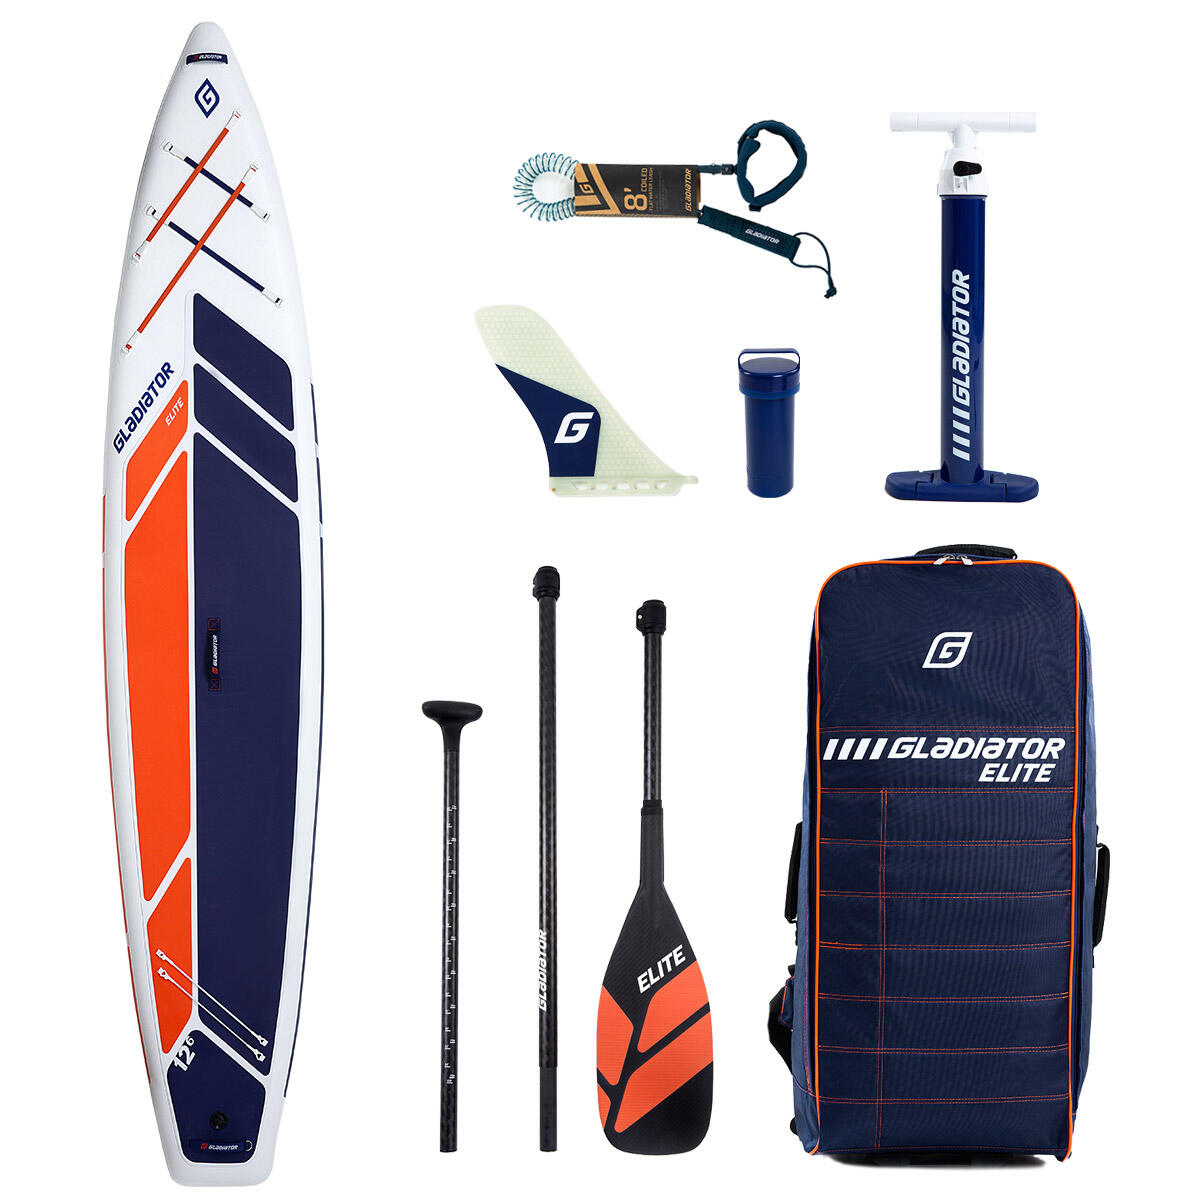 Gladiator Elite LT 12'6 x 29” x 4.7” Touring Paddle Board for the Lighter Rider 1/7